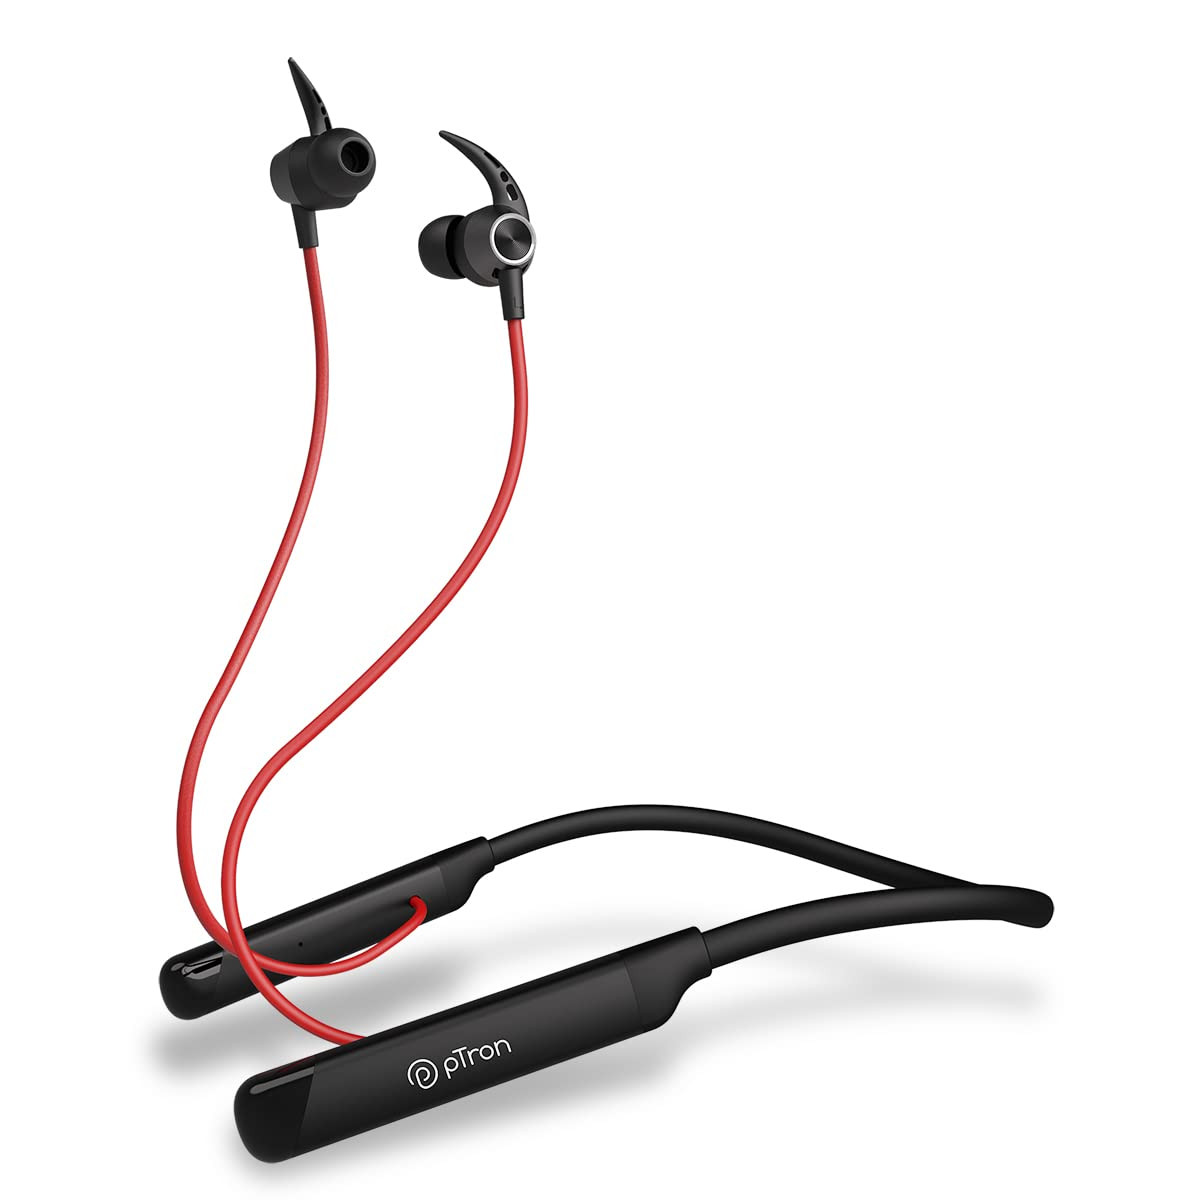 pTron Tangent Sports 60Hrs Playtime ENC BT52 Headphone AptSense 40ms Low Latency Gaming Punchy Bass Dual Device Pairing in-Ear Wireless Earphone HD Mic Type-C Fast Charging  IPX4 BlackRed